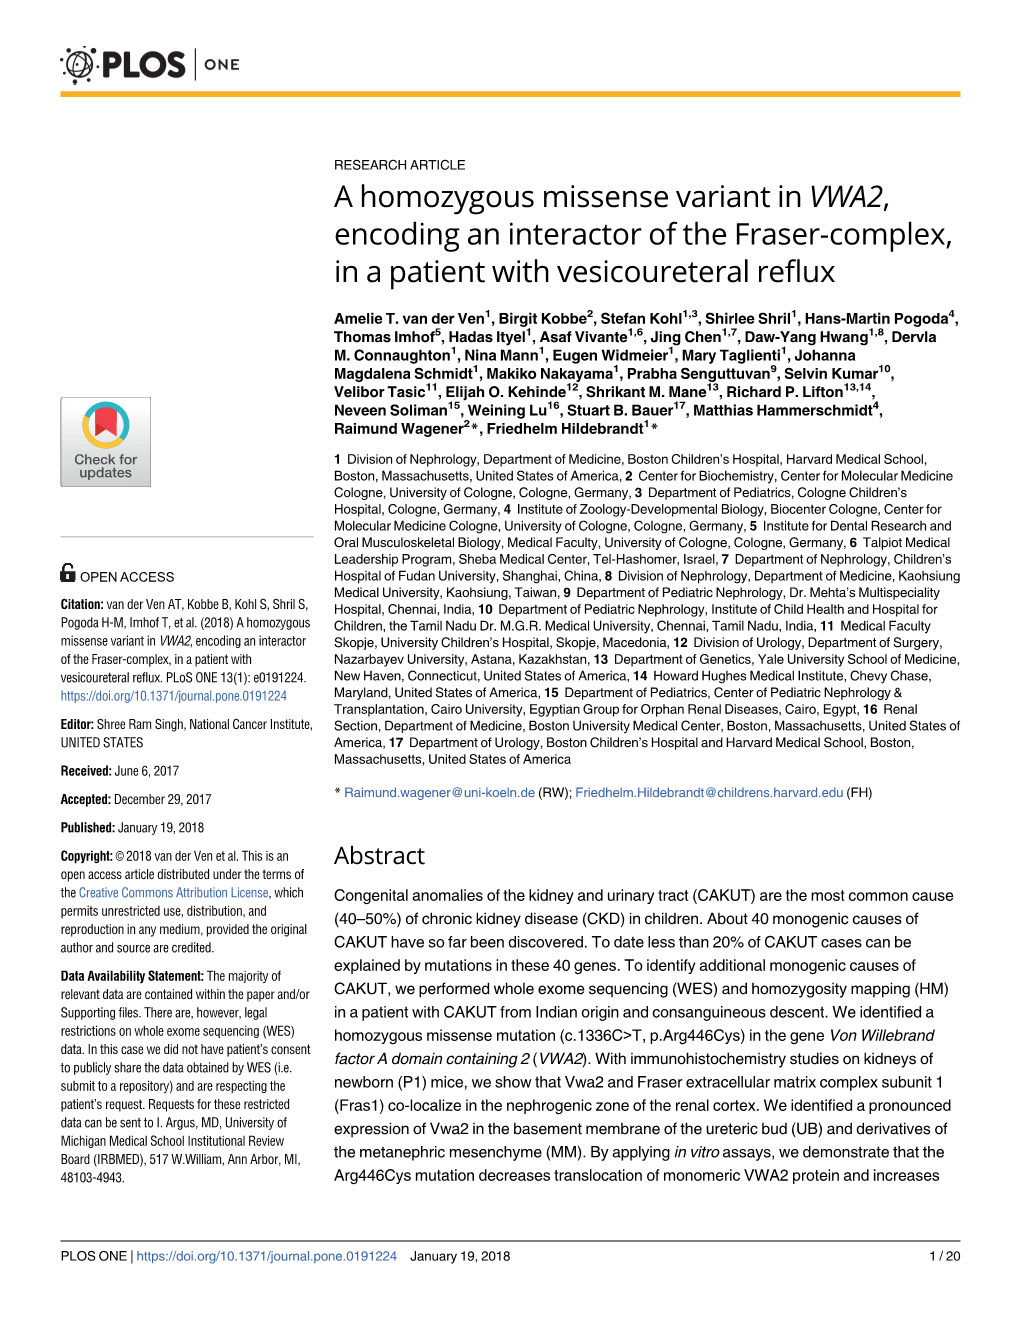 A Homozygous Missense Variant in VWA2, Encoding an Interactor of the Fraser-Complex, in a Patient with Vesicoureteral Reflux